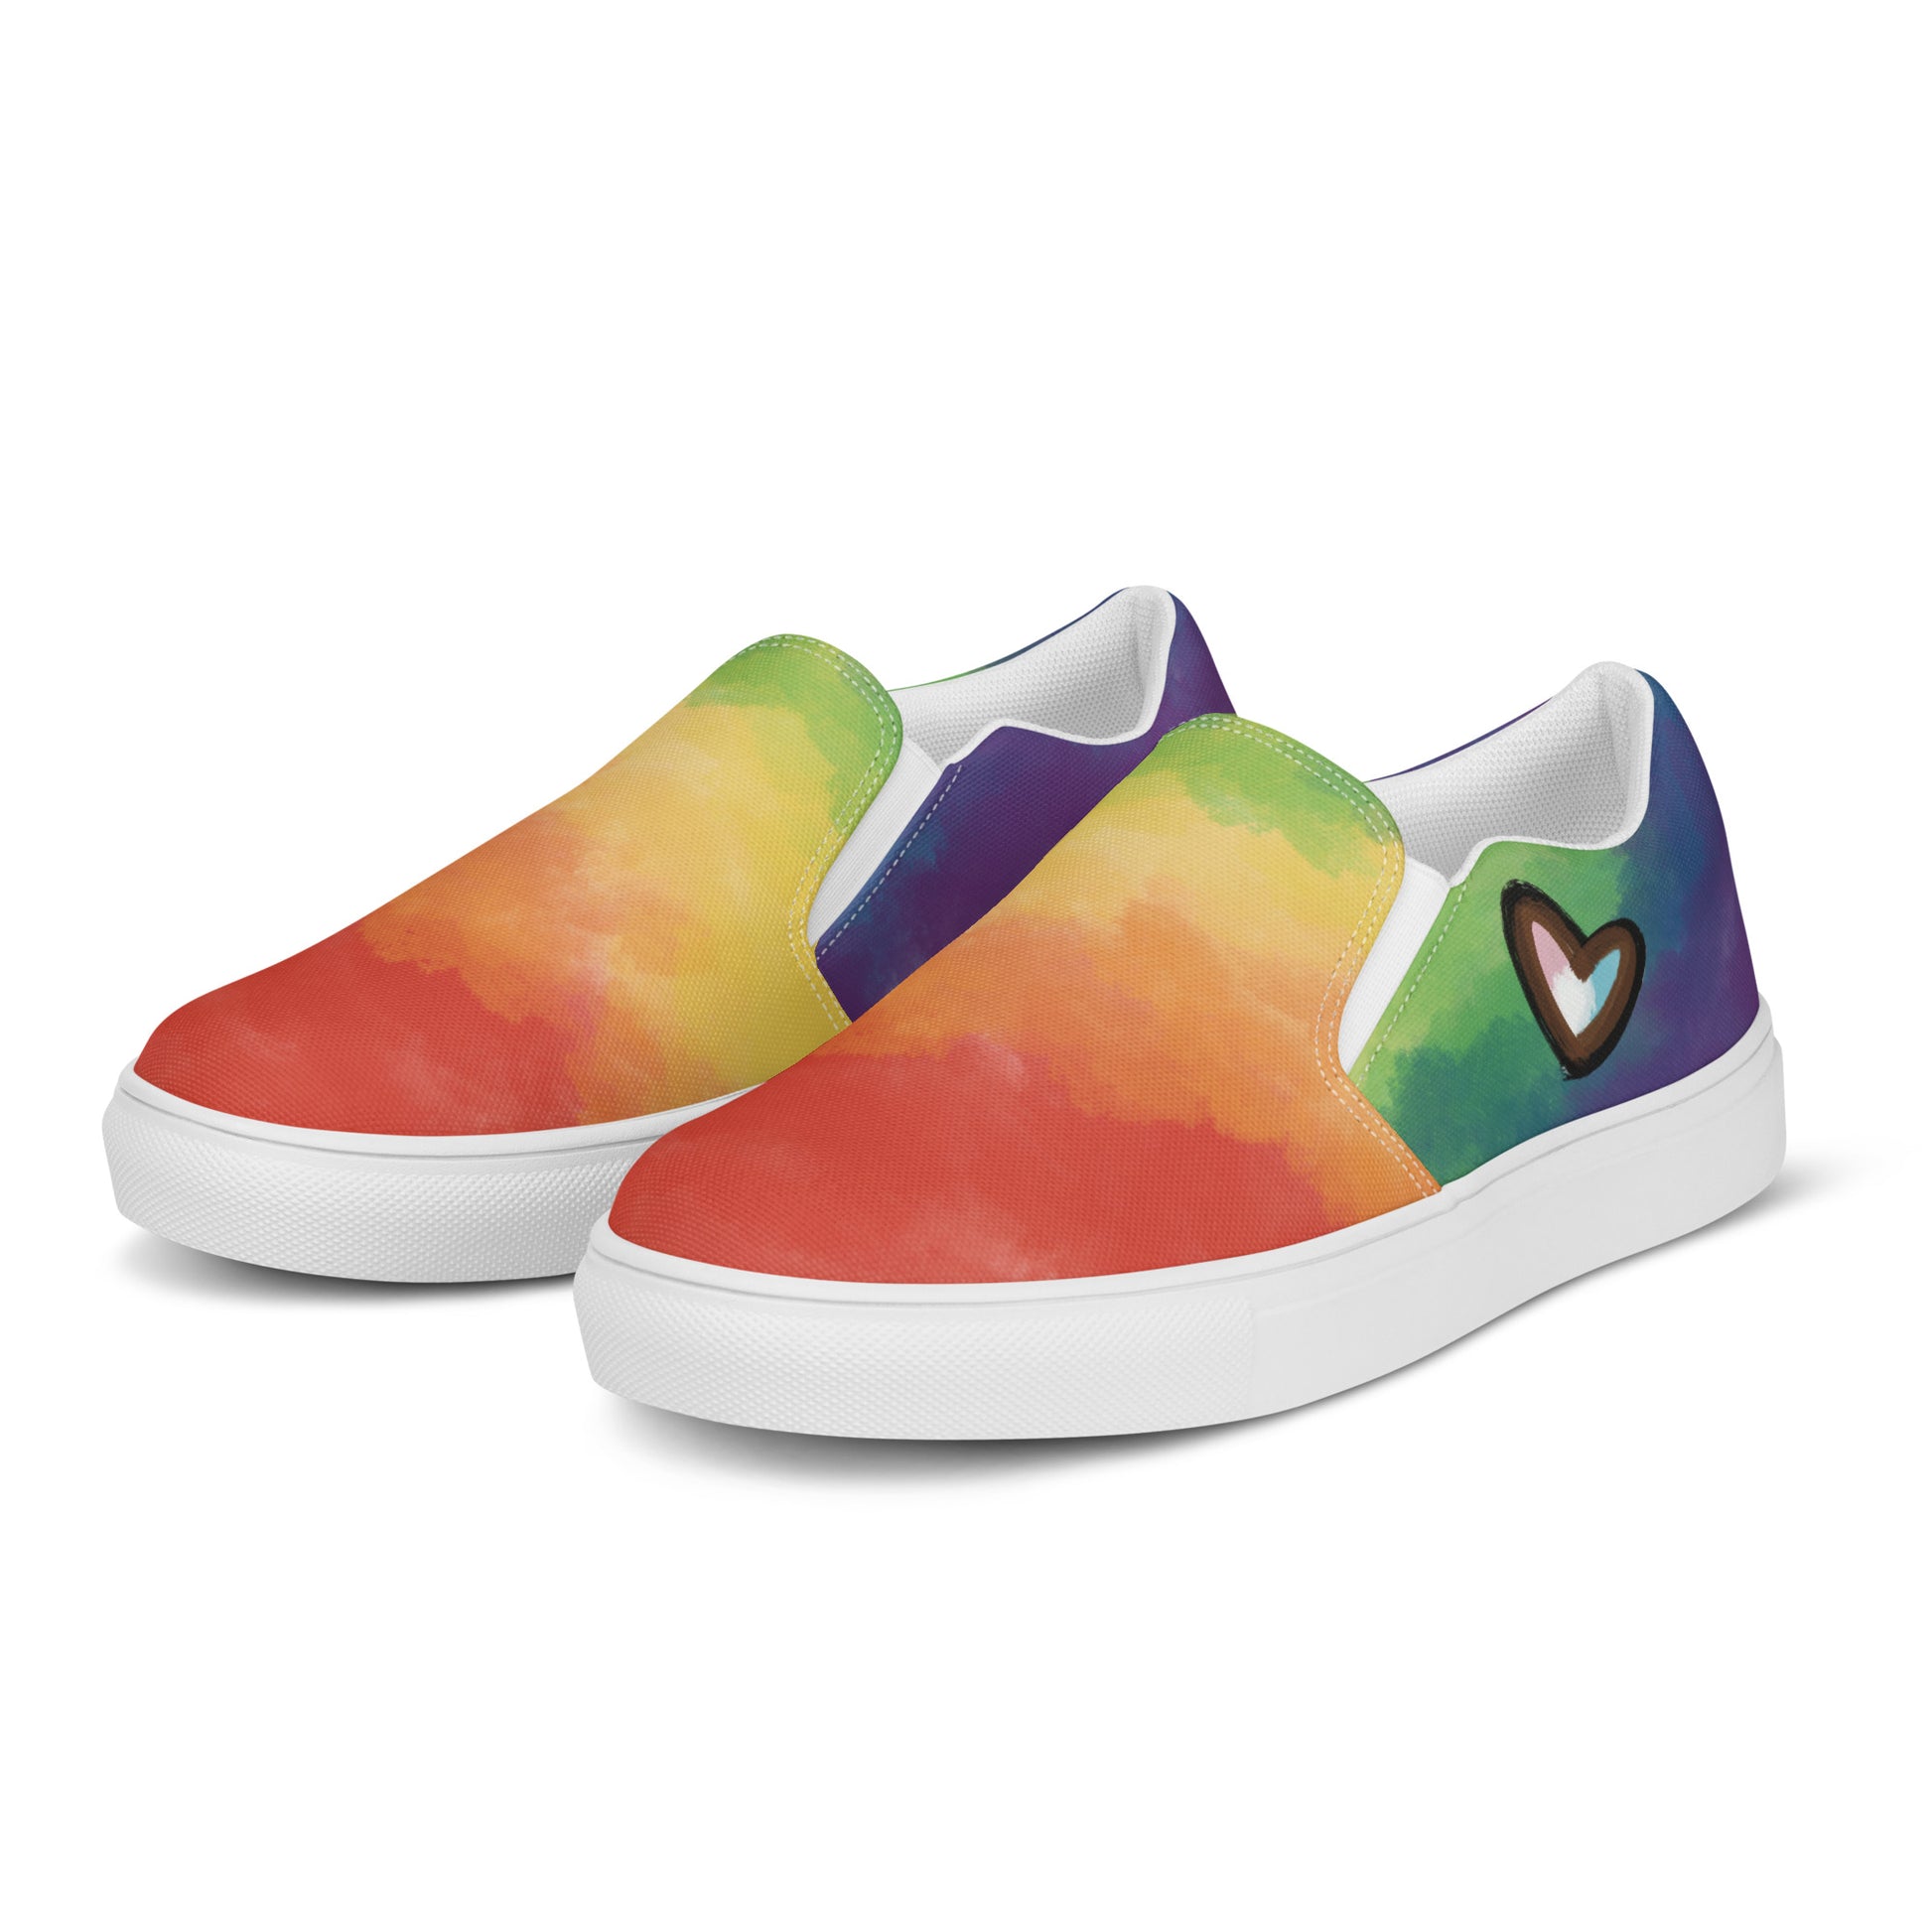 Left front view: A pair of slip on shoes with rainbow clouds wrapping around the shoe, a double heart in black and brown with the trans pride flag inside, and the Aras Sivad Studio logo on the back of the heel.